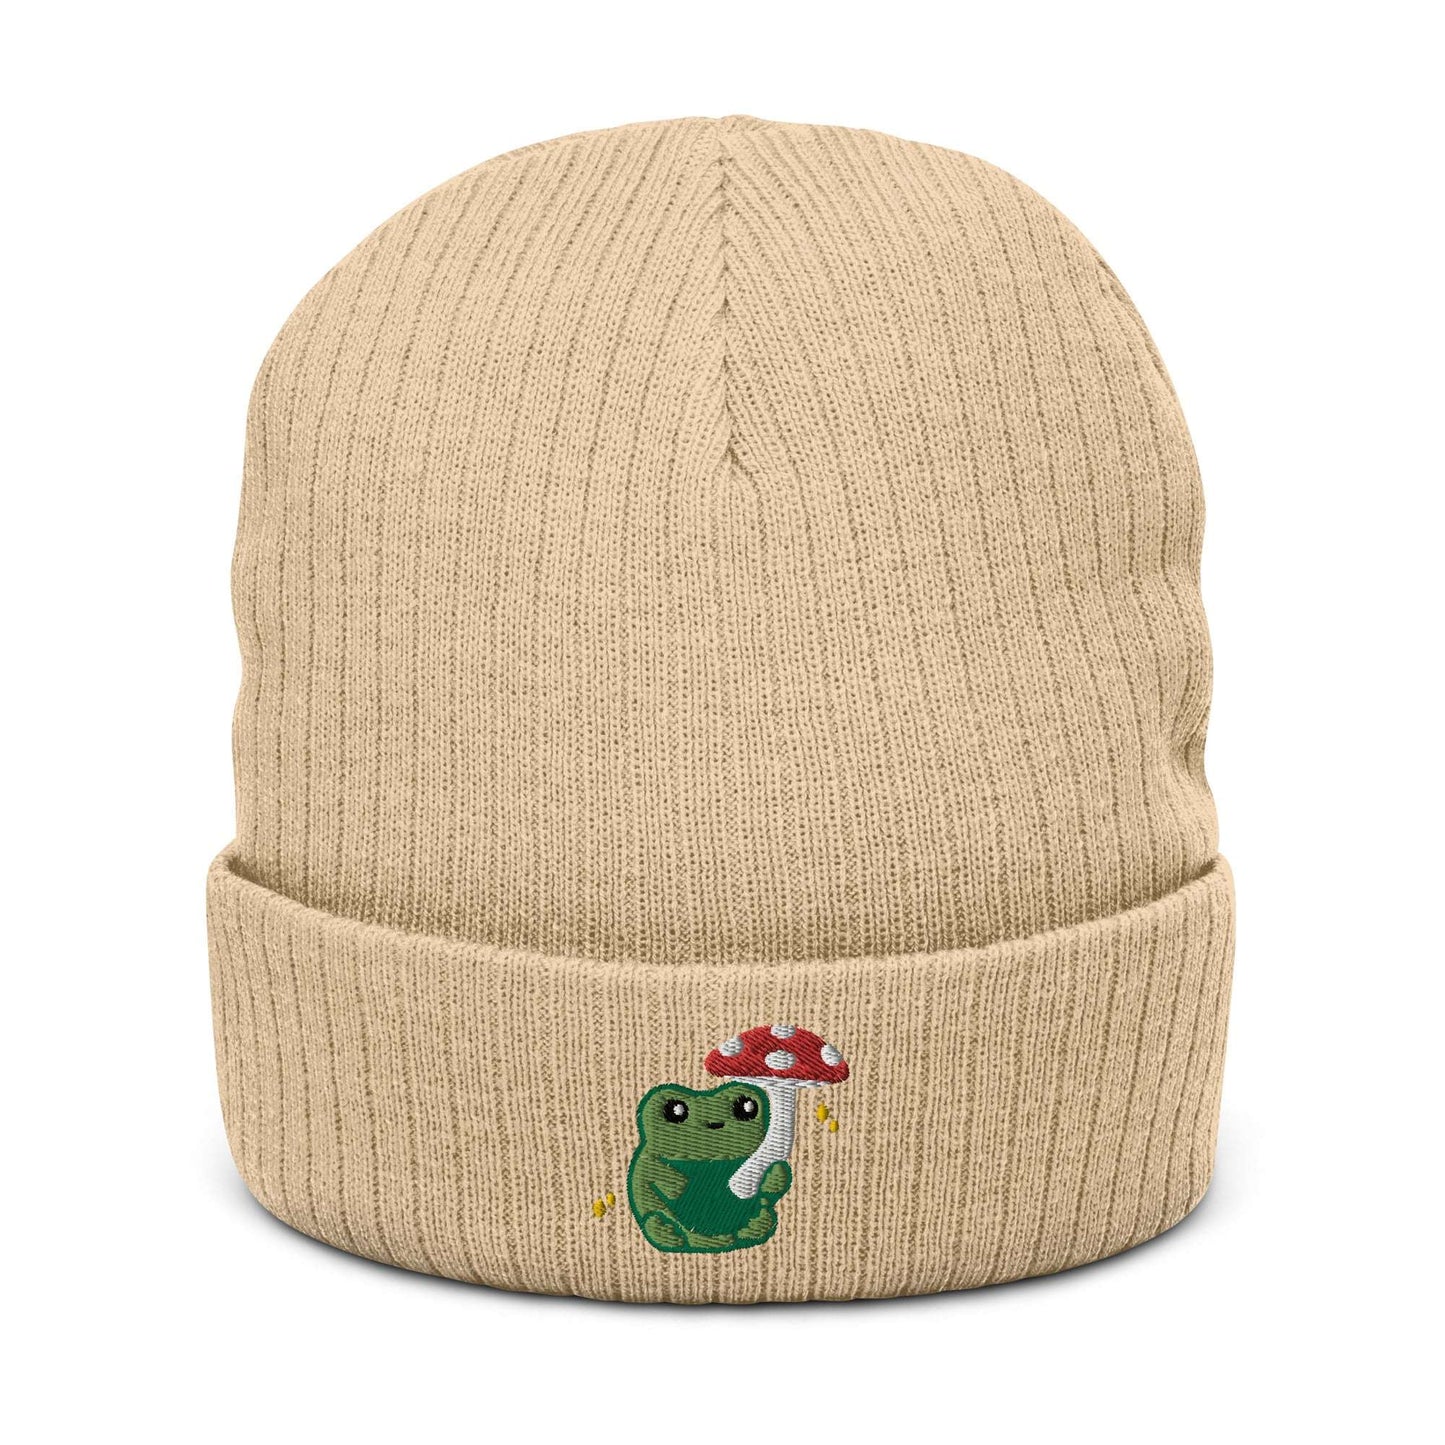 Ribbed Knit Beanie with Cute Embroidered Frog holding a Mushroom Umbrella: Beige